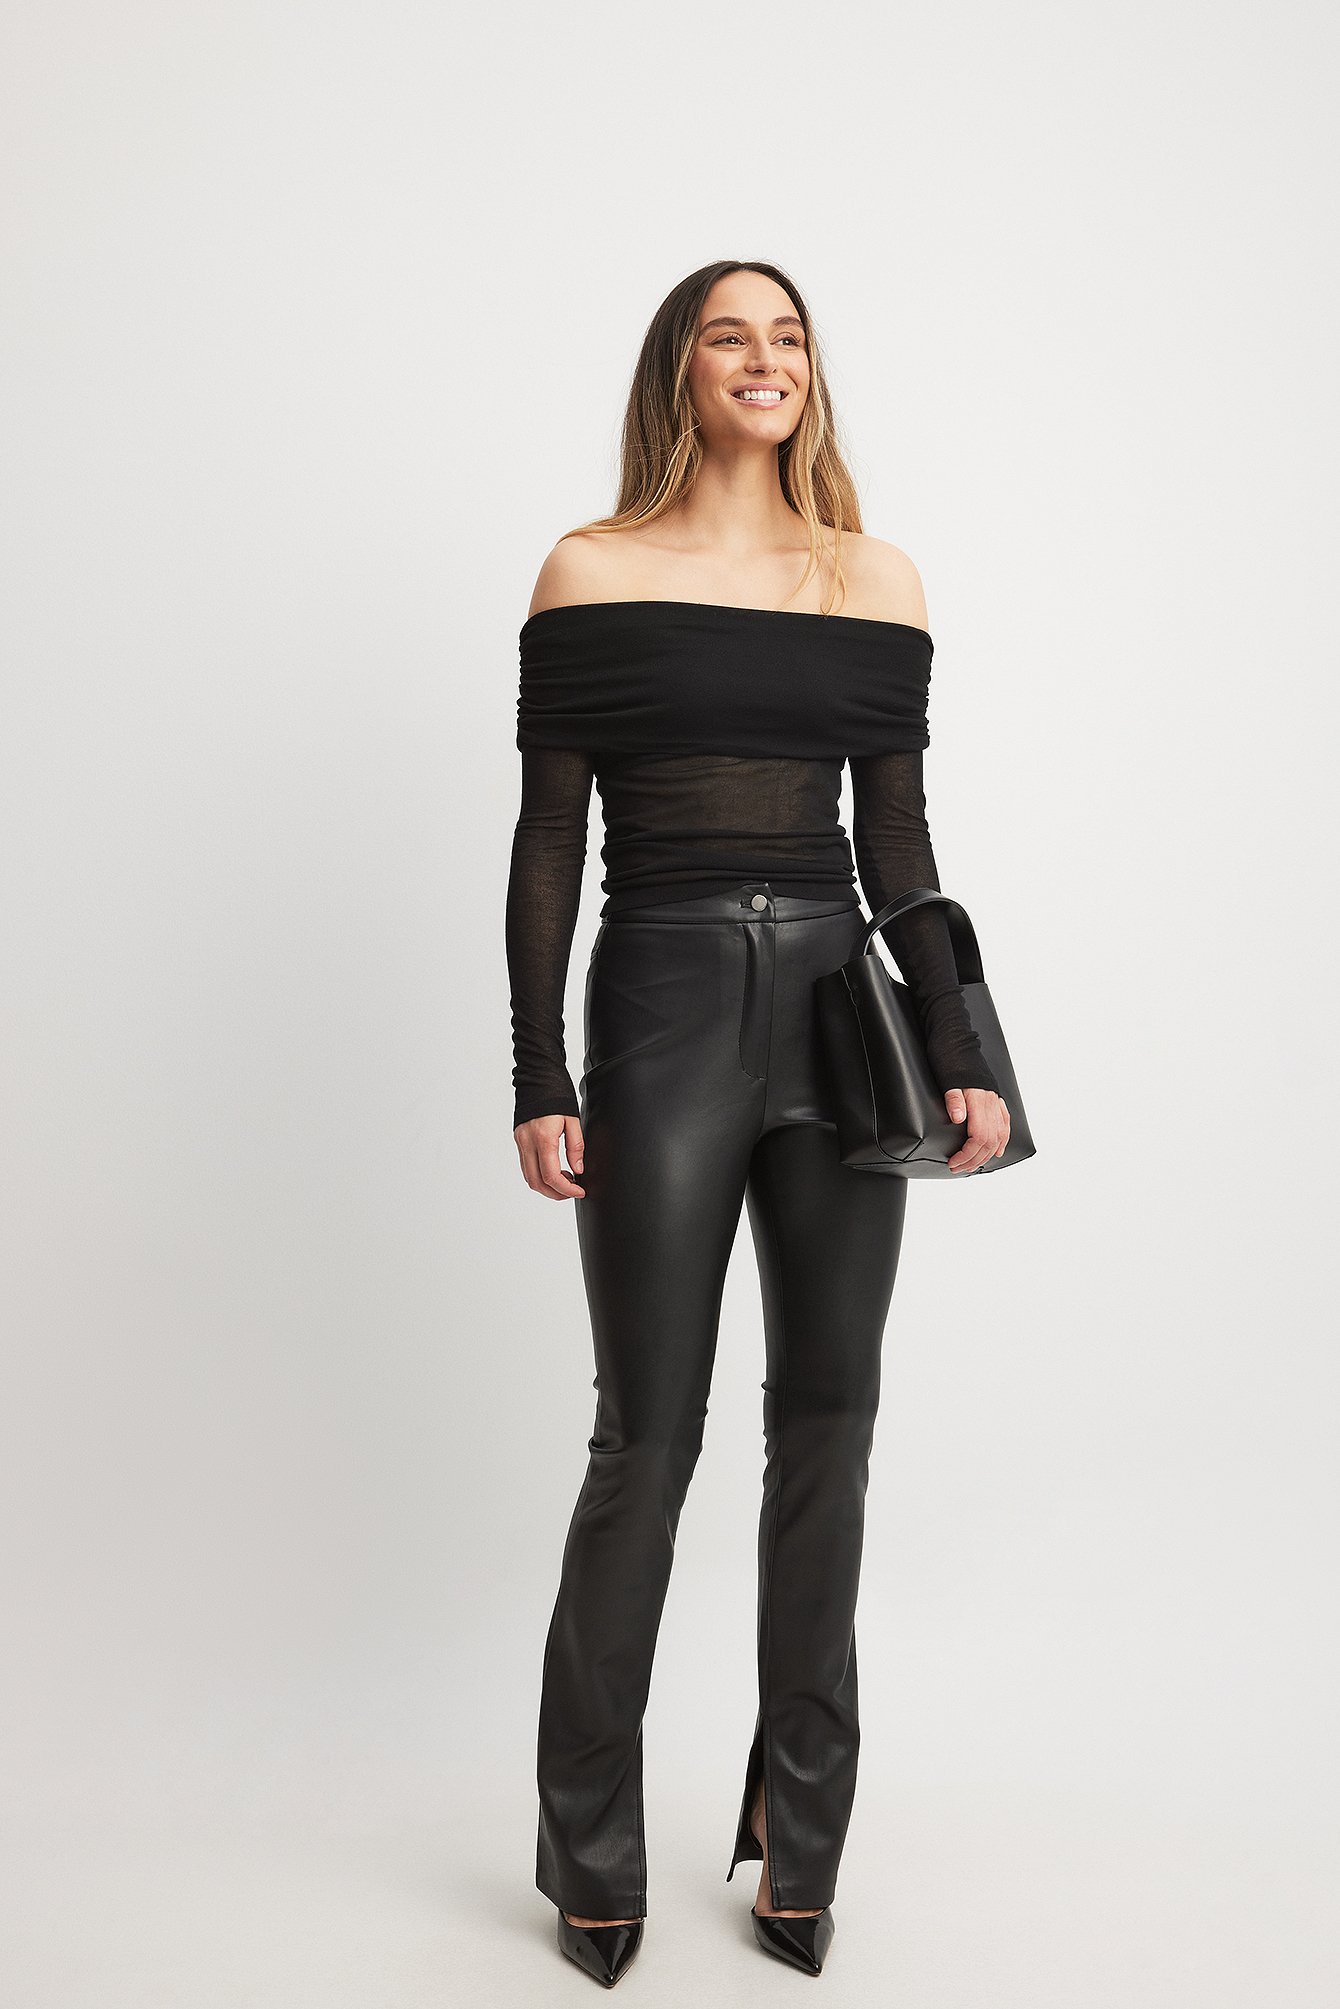 Faux leather trousers for women, Faux leather clothes